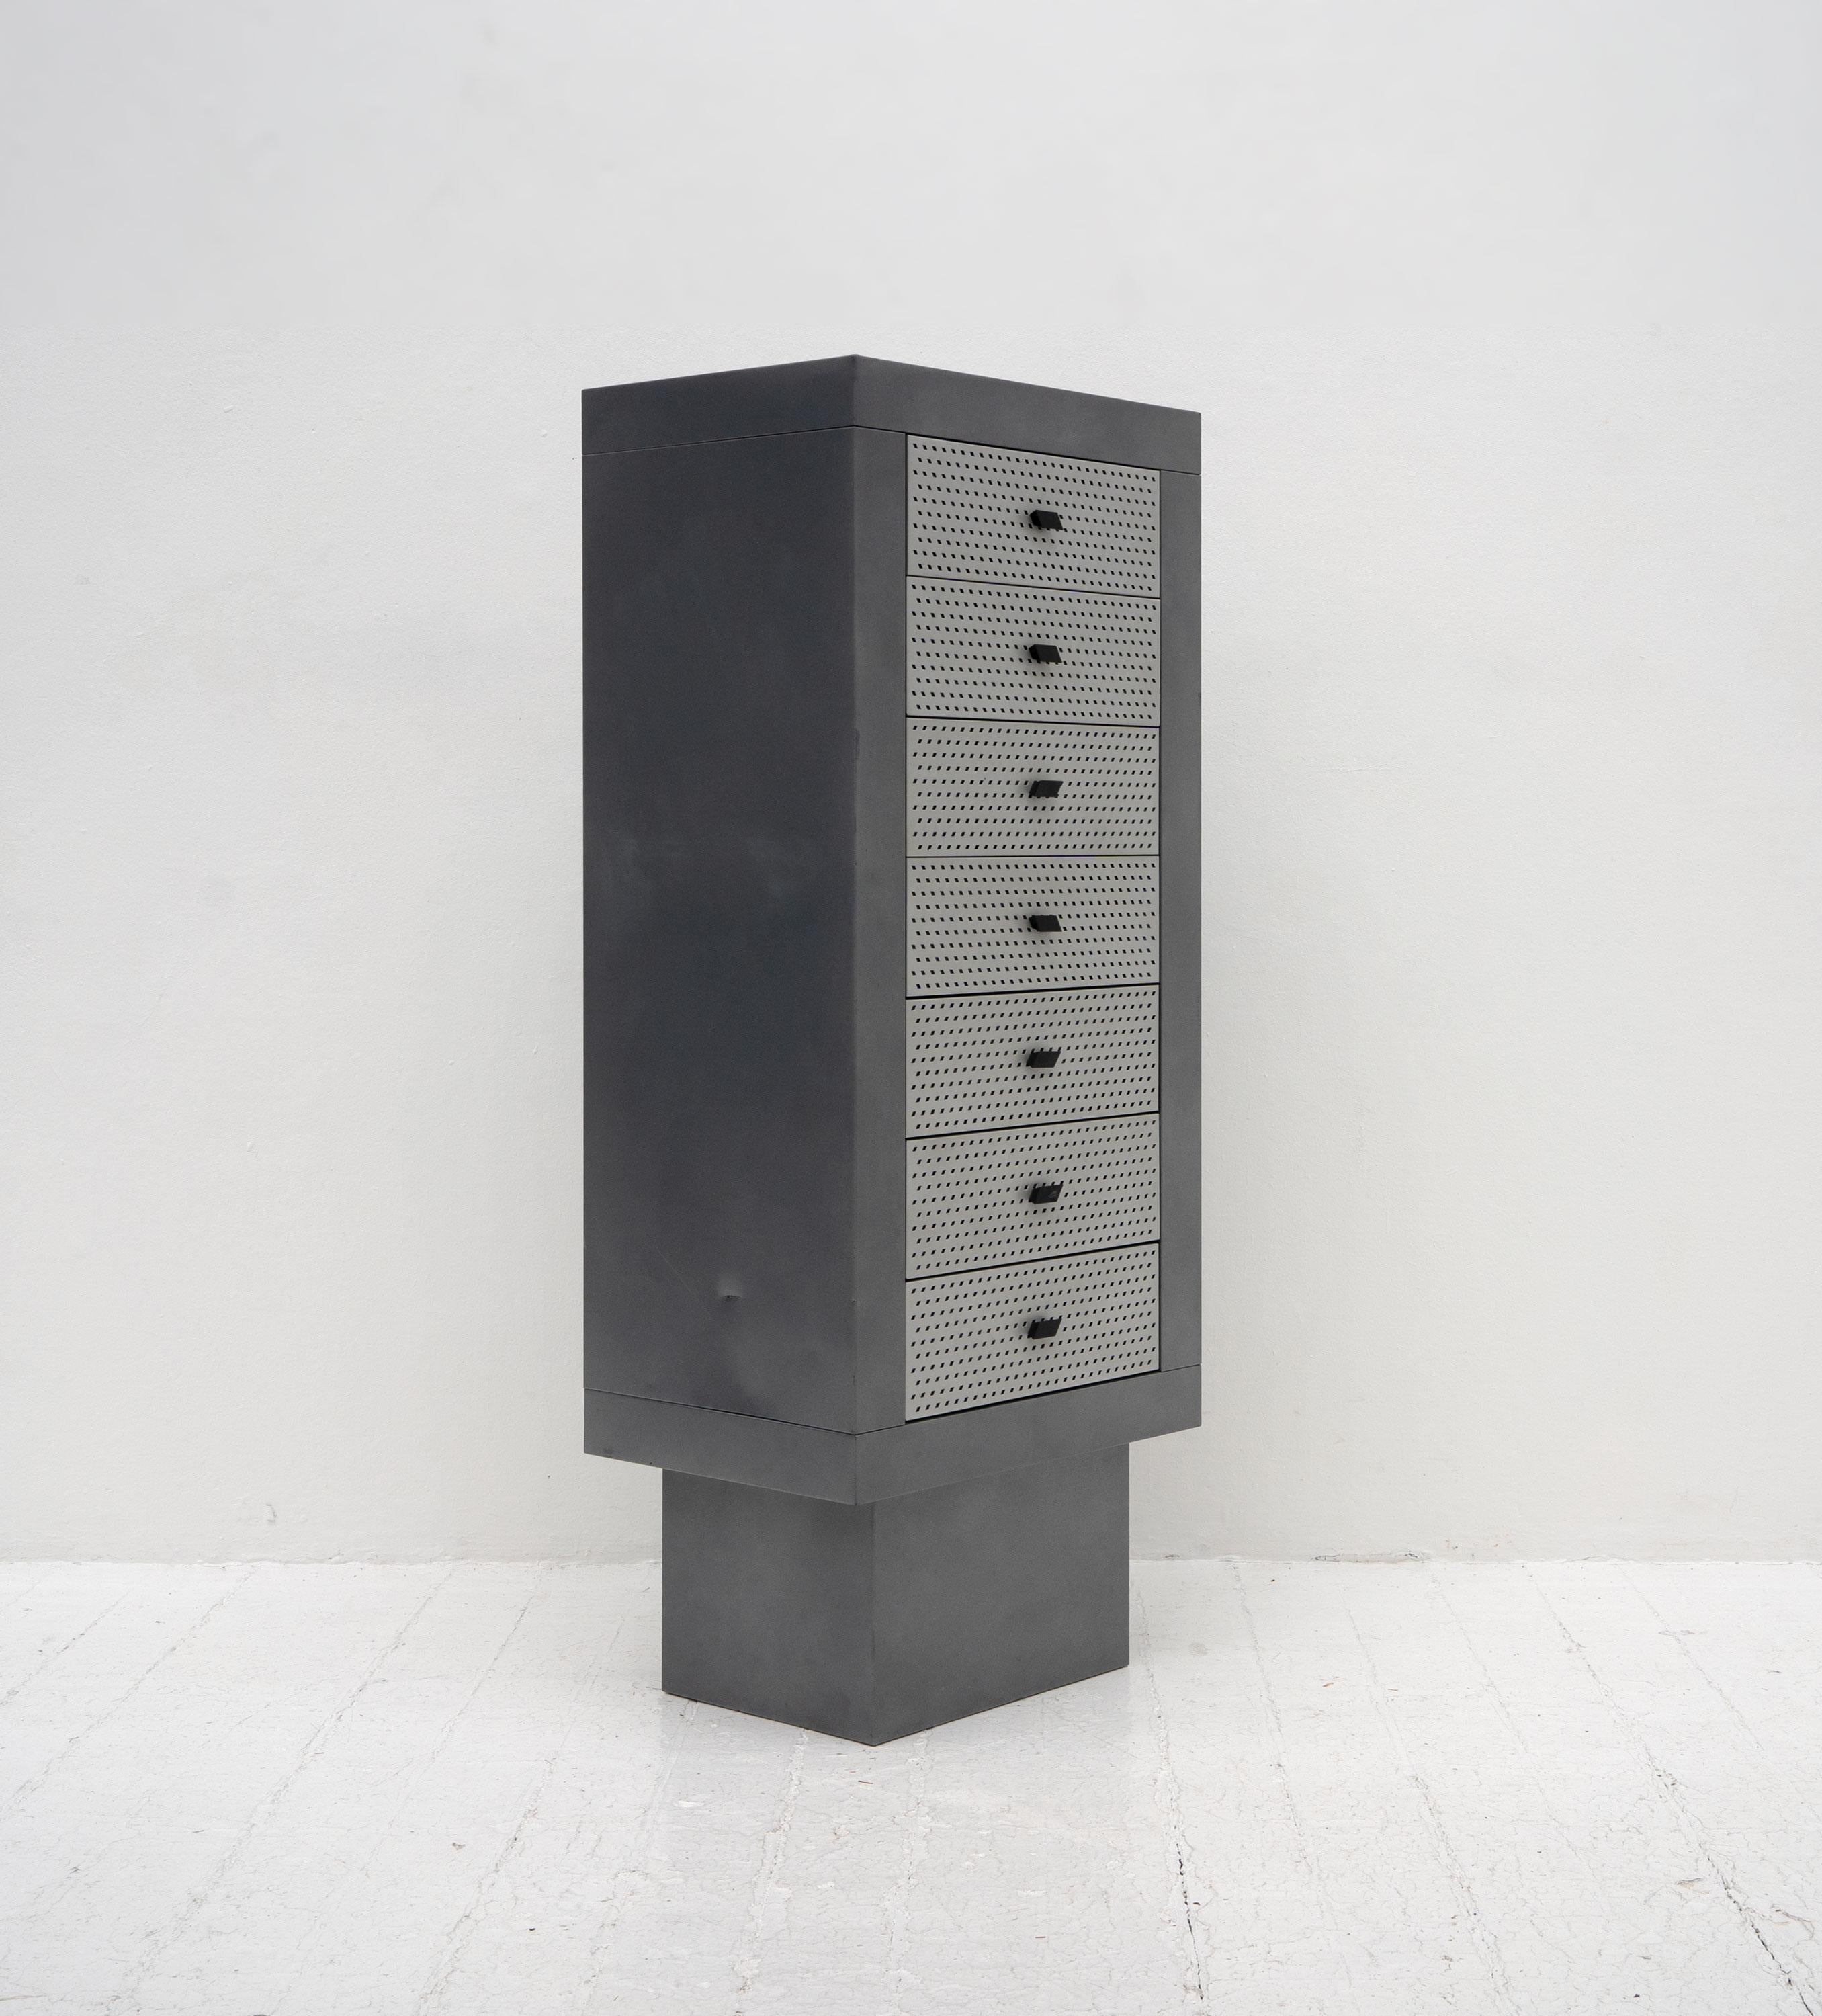 Settimanale Chest of drawers / Tallboy by Matteo Thun for Bieffeplast, 1985 For Sale 1